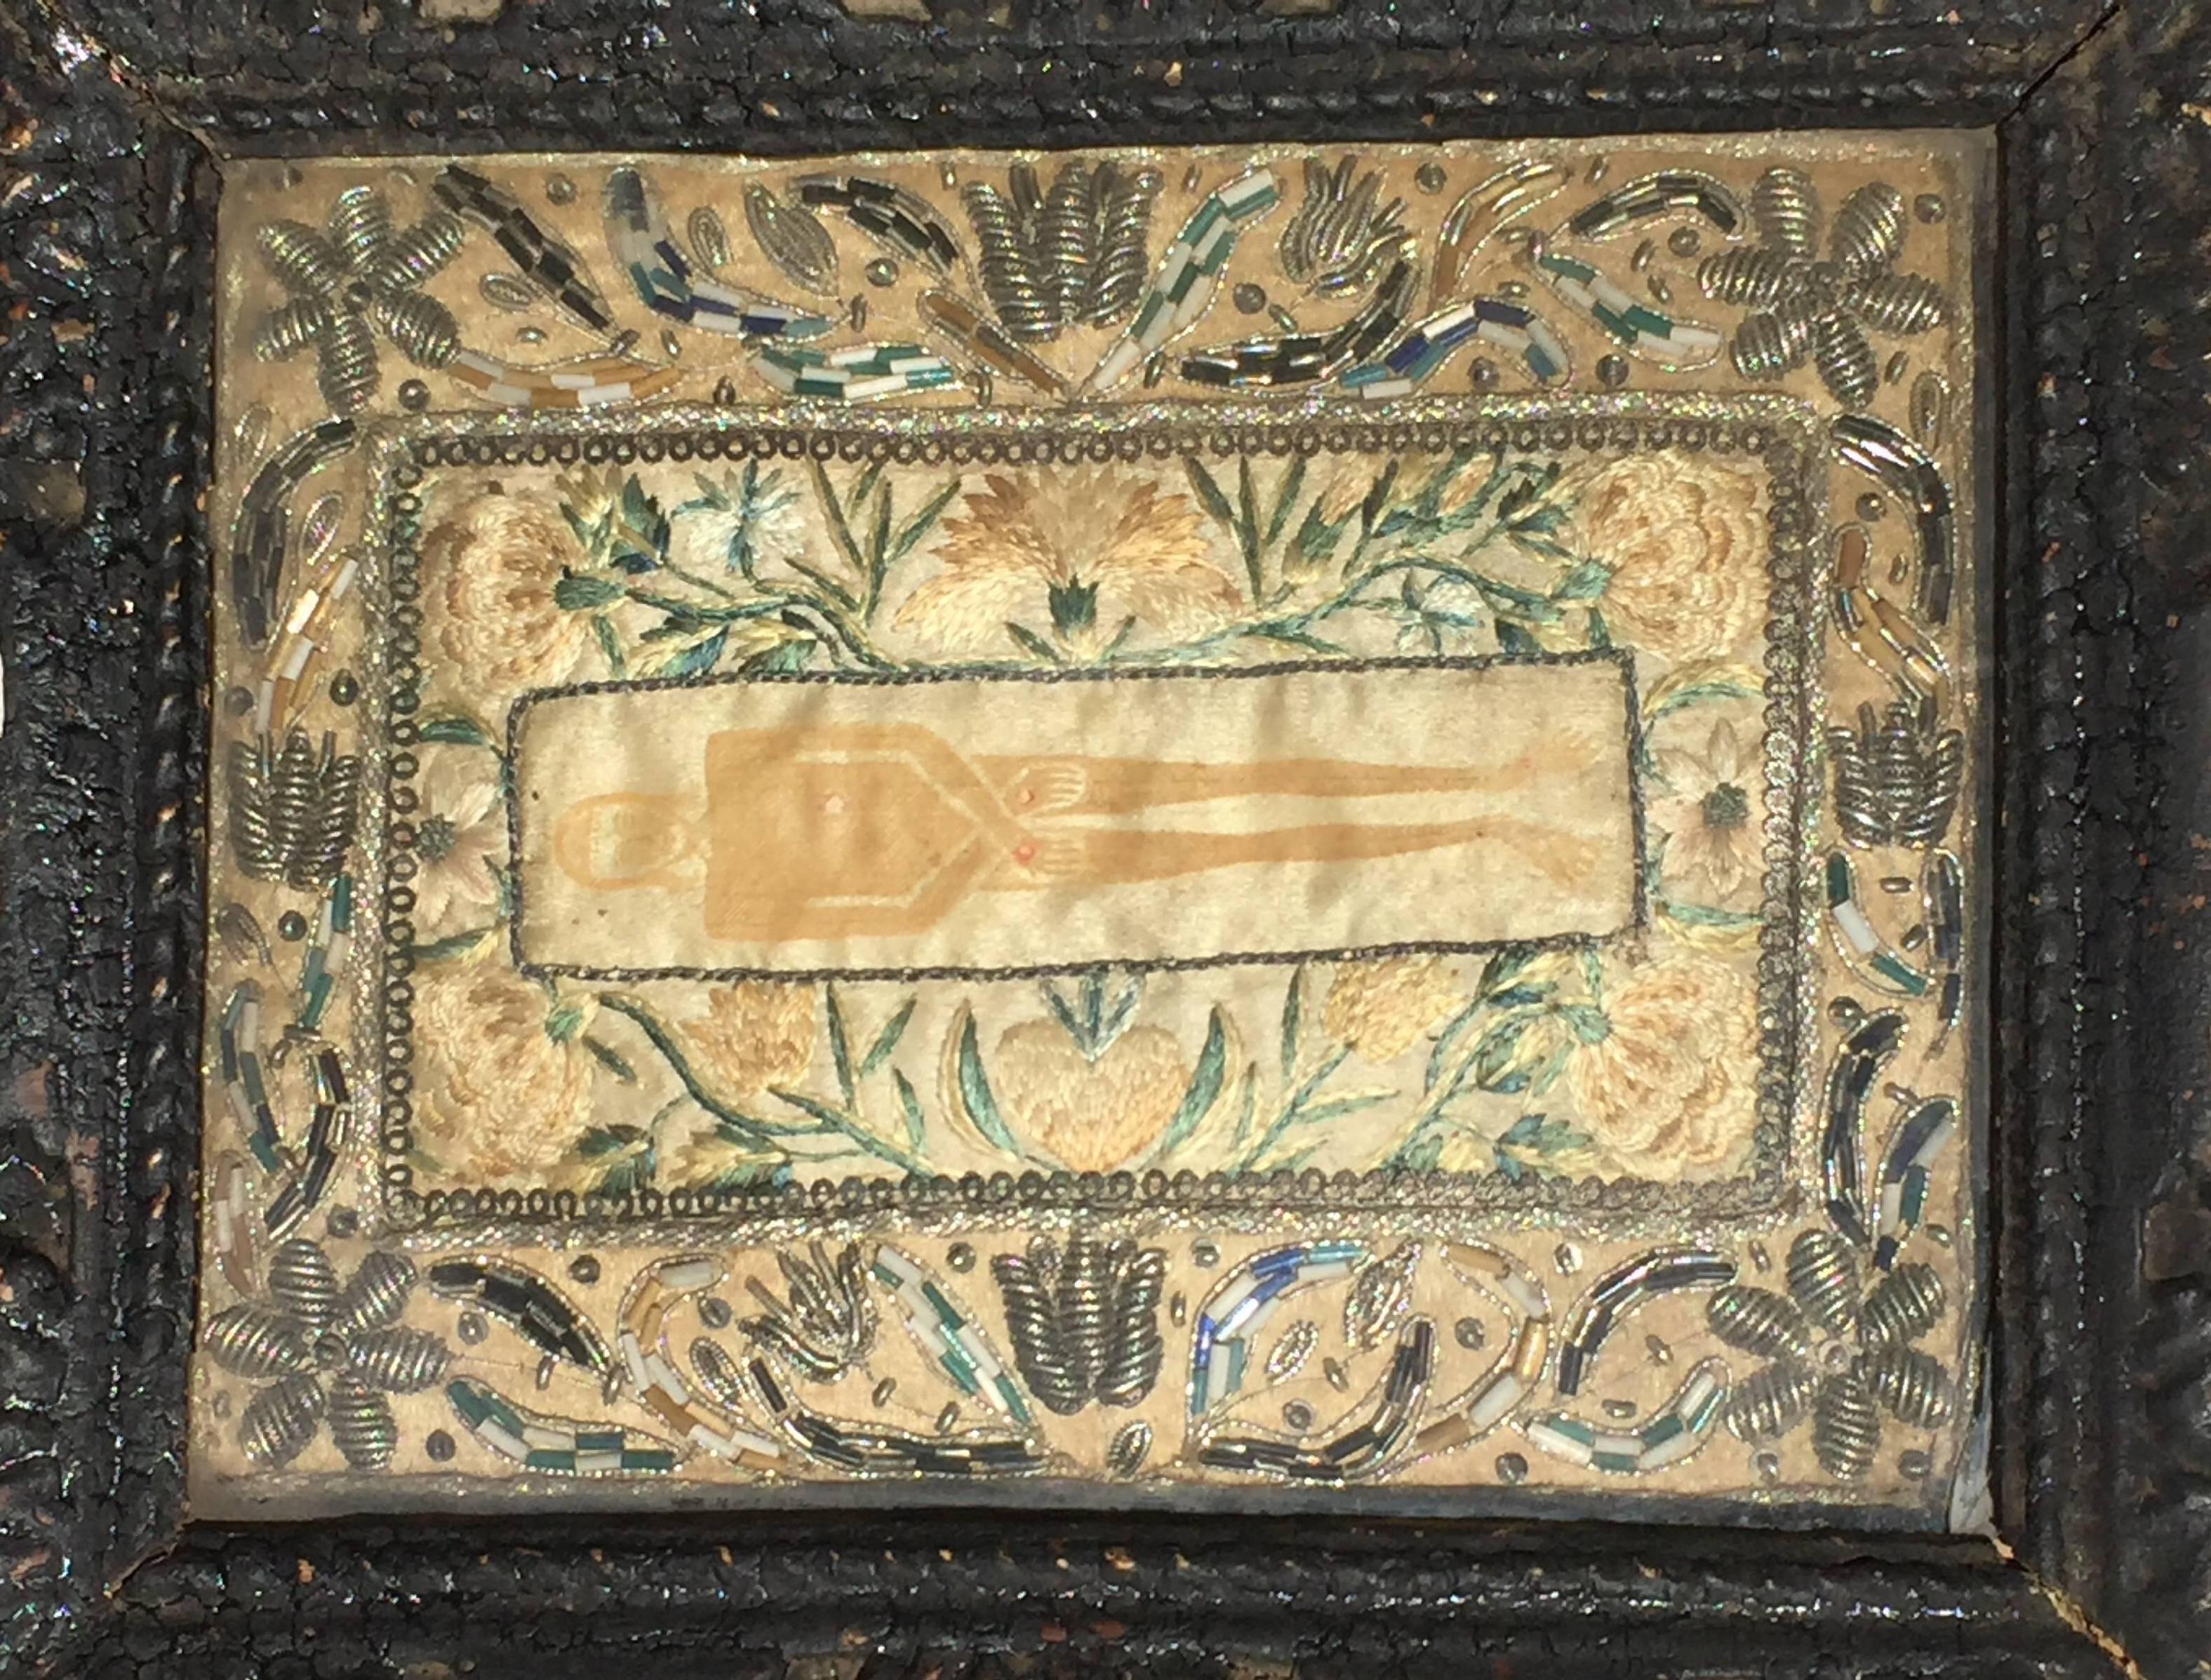 A late 18th century French devotional embroidery depicting the Shroud of Besançon, which was a replica of the Shroud of Turin destroyed in the French revolution. Colored silk and metallic thread embroidery with beadwork. Central stenciled/painted